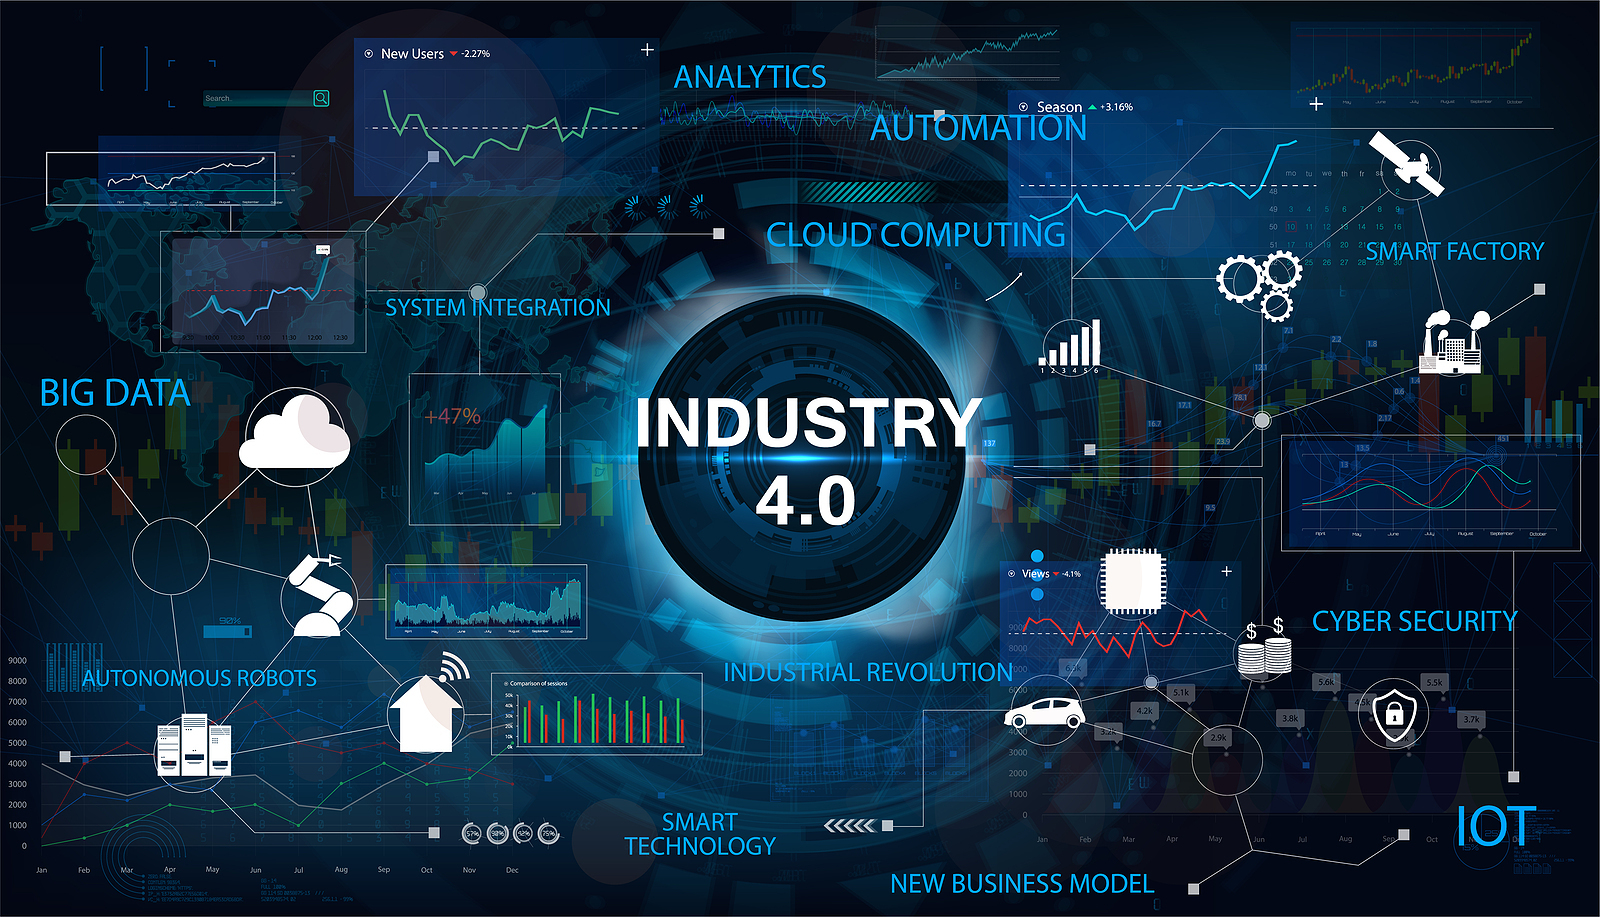 The Industrial Revolution 4.0 and How Mitsubishi Electric's Participation